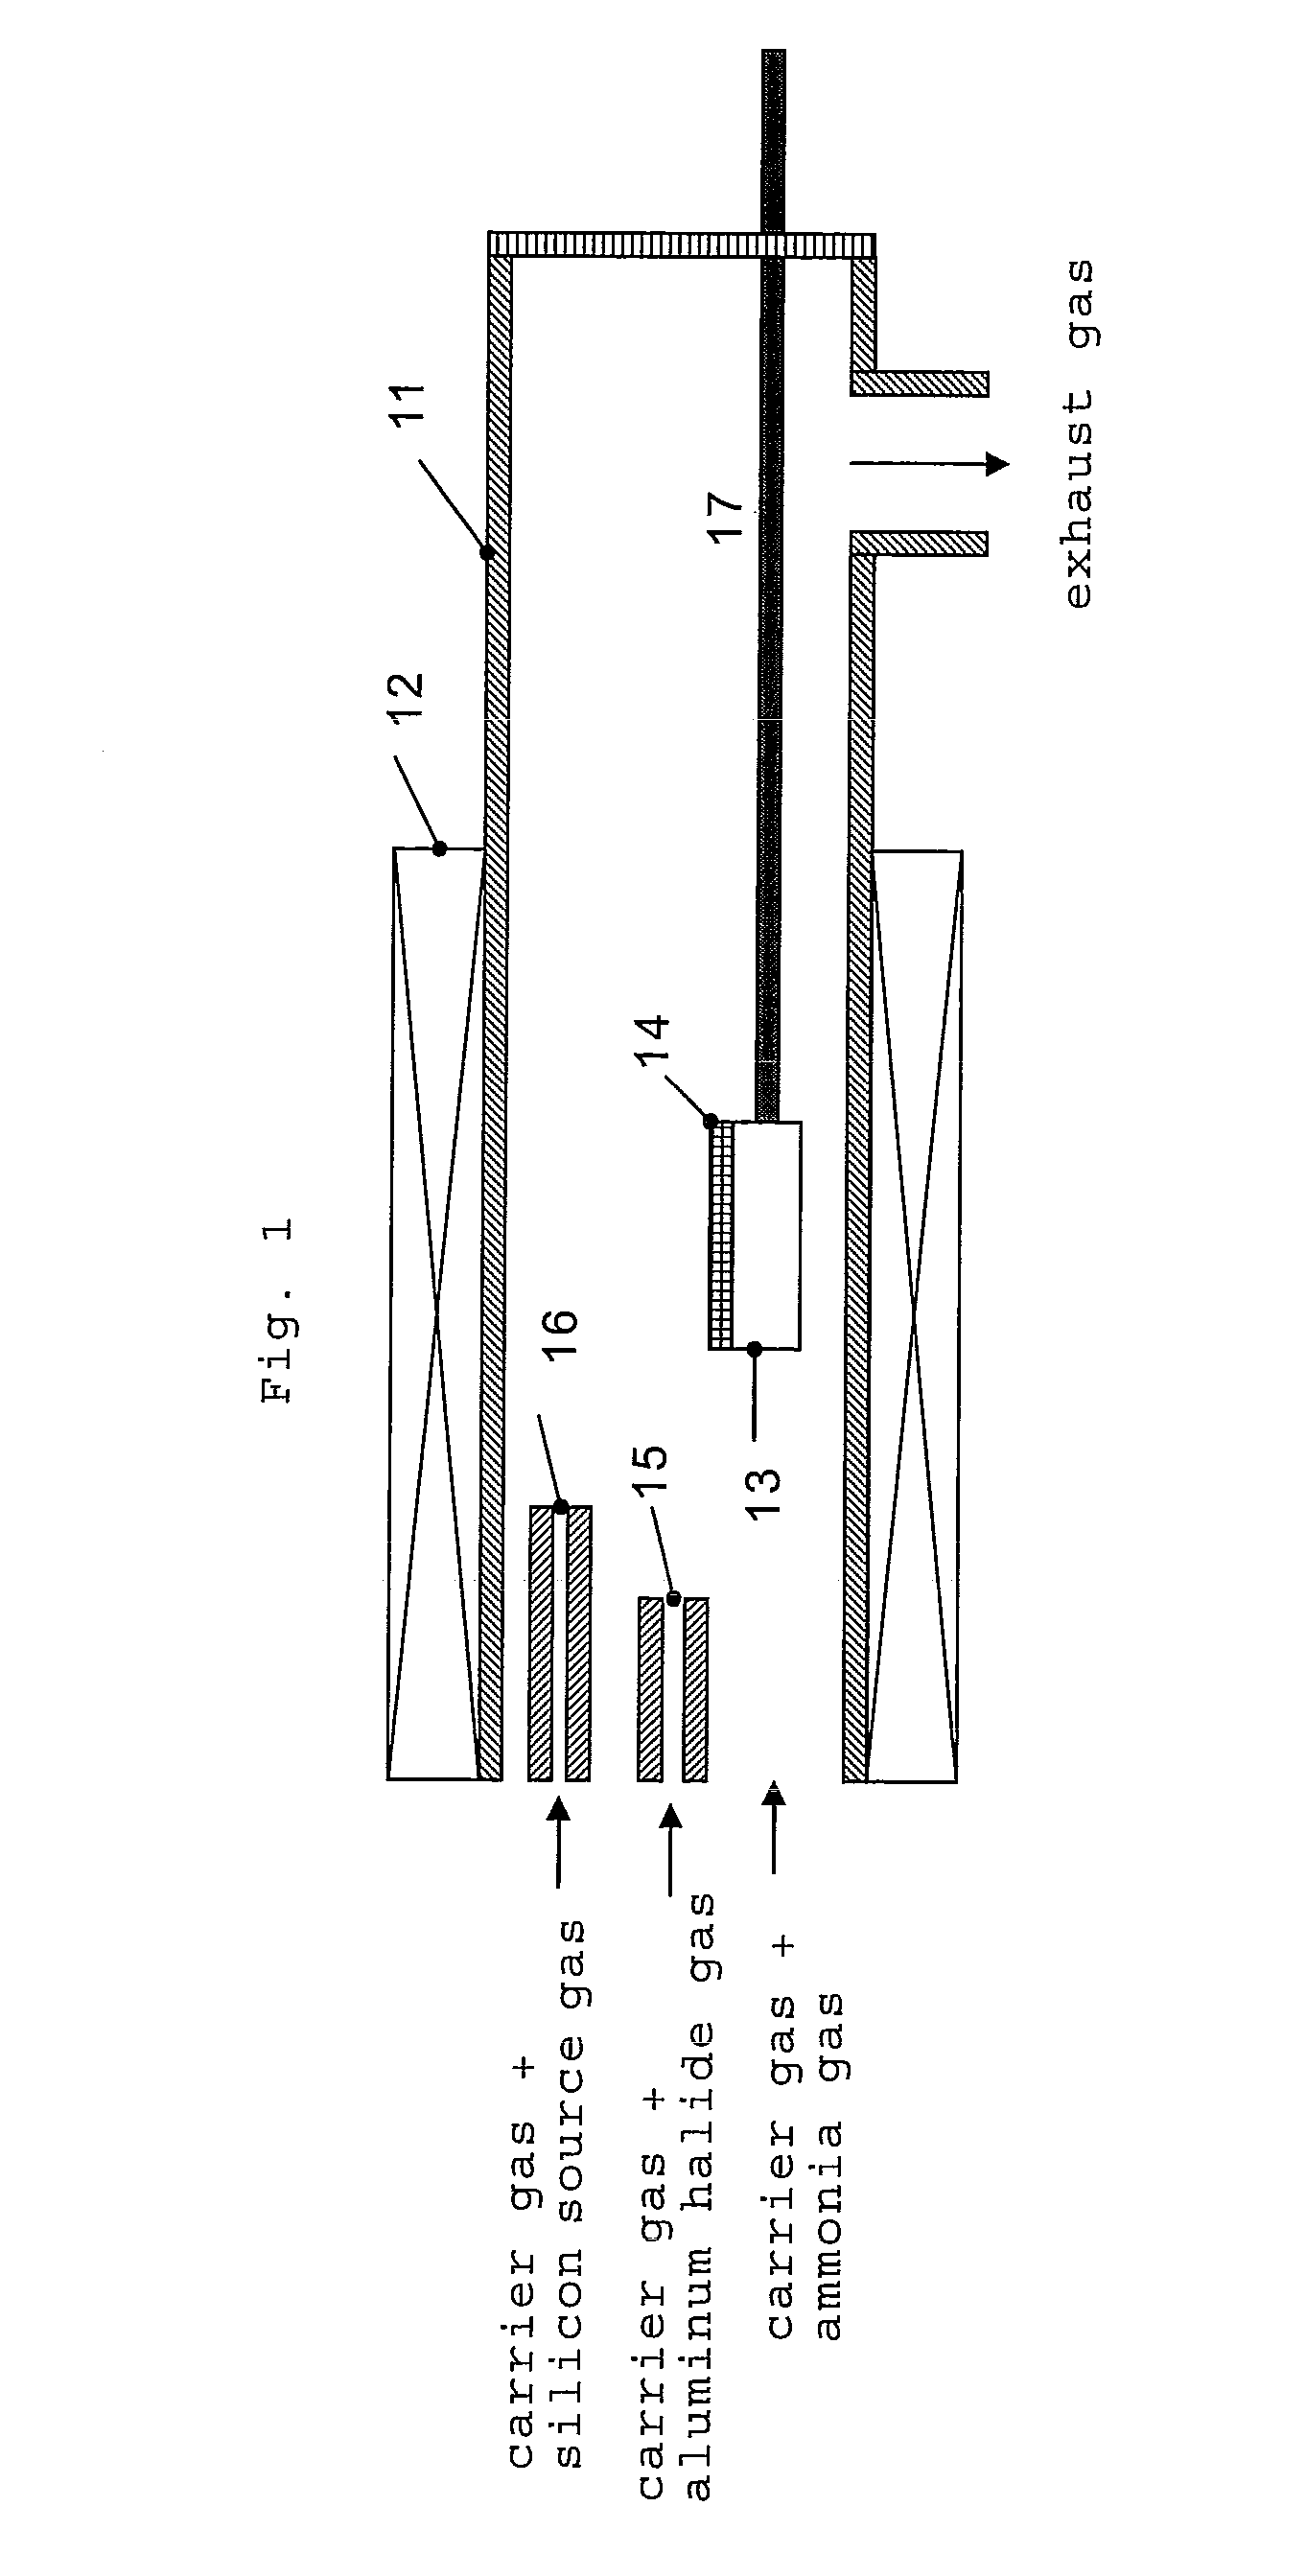 N-type conductive aluminum nitride semiconductor crystal and manufacturing method thereof